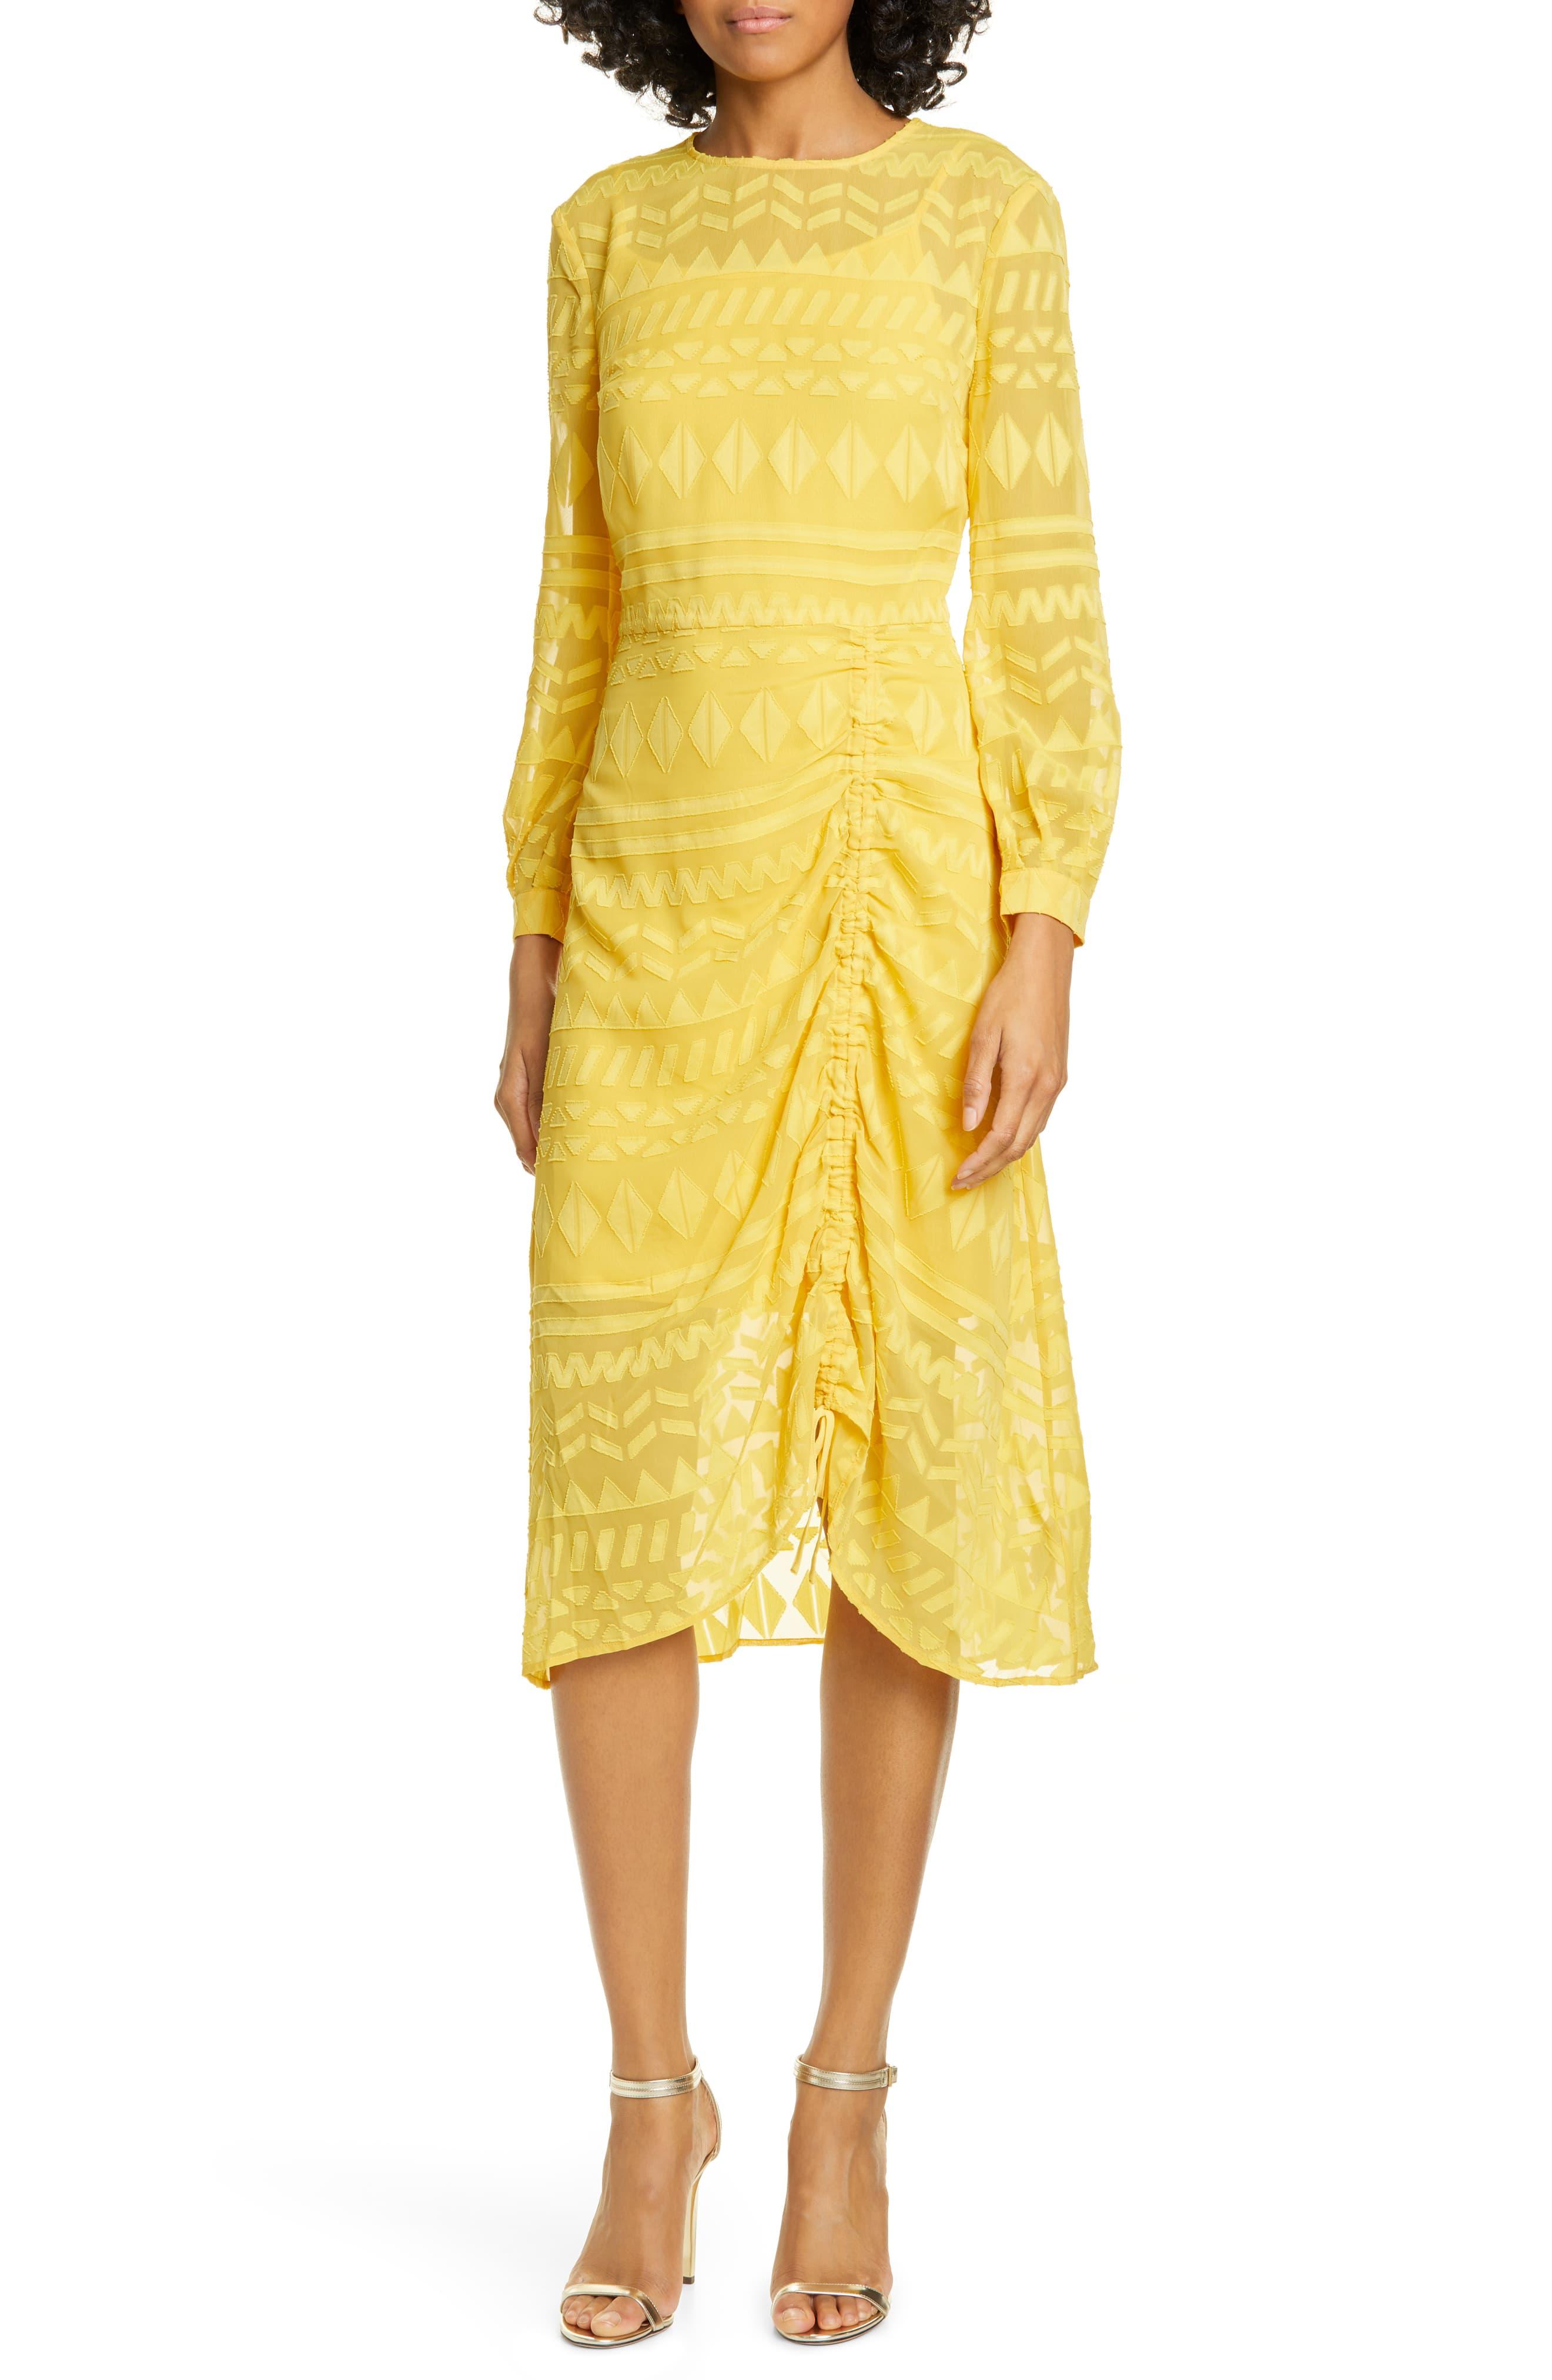 Ted Baker Safa Long Sleeve Ruched Burnout Lace Dress in Yellow - Lyst